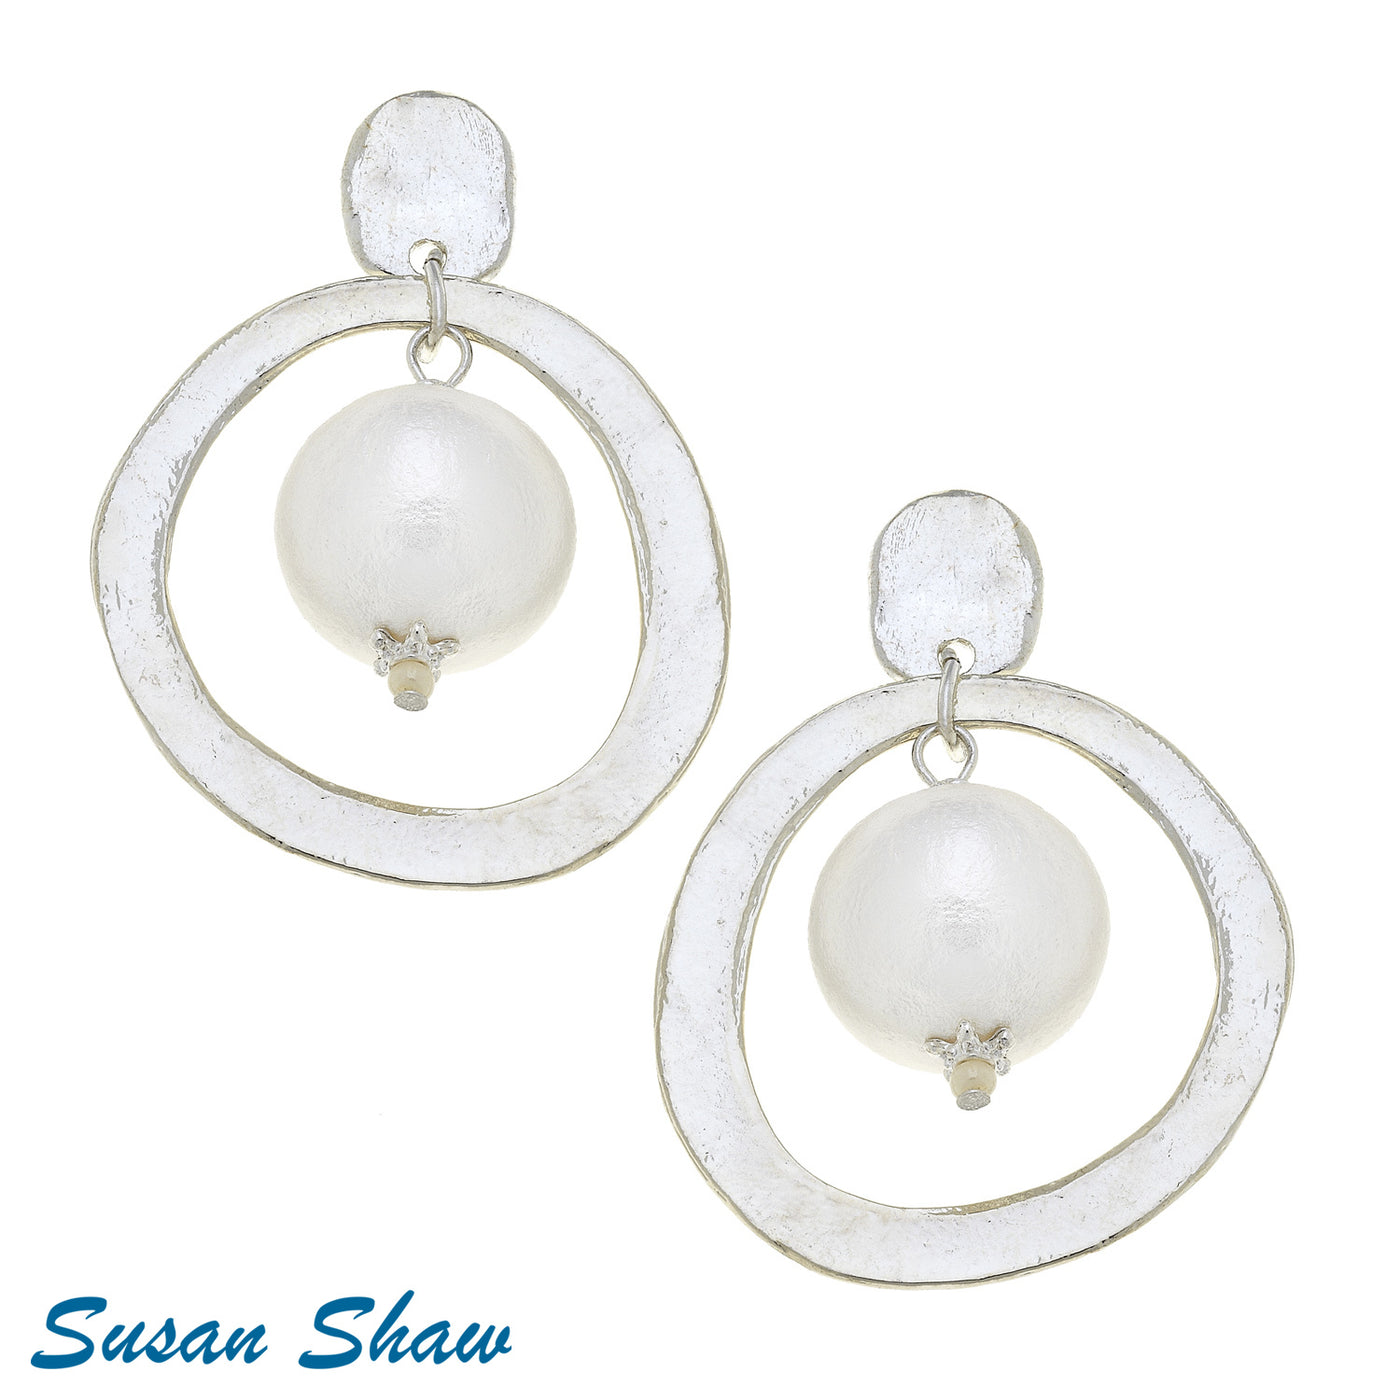 Silver Hoops with Cotton Pearl Earrings - Susan Shaw